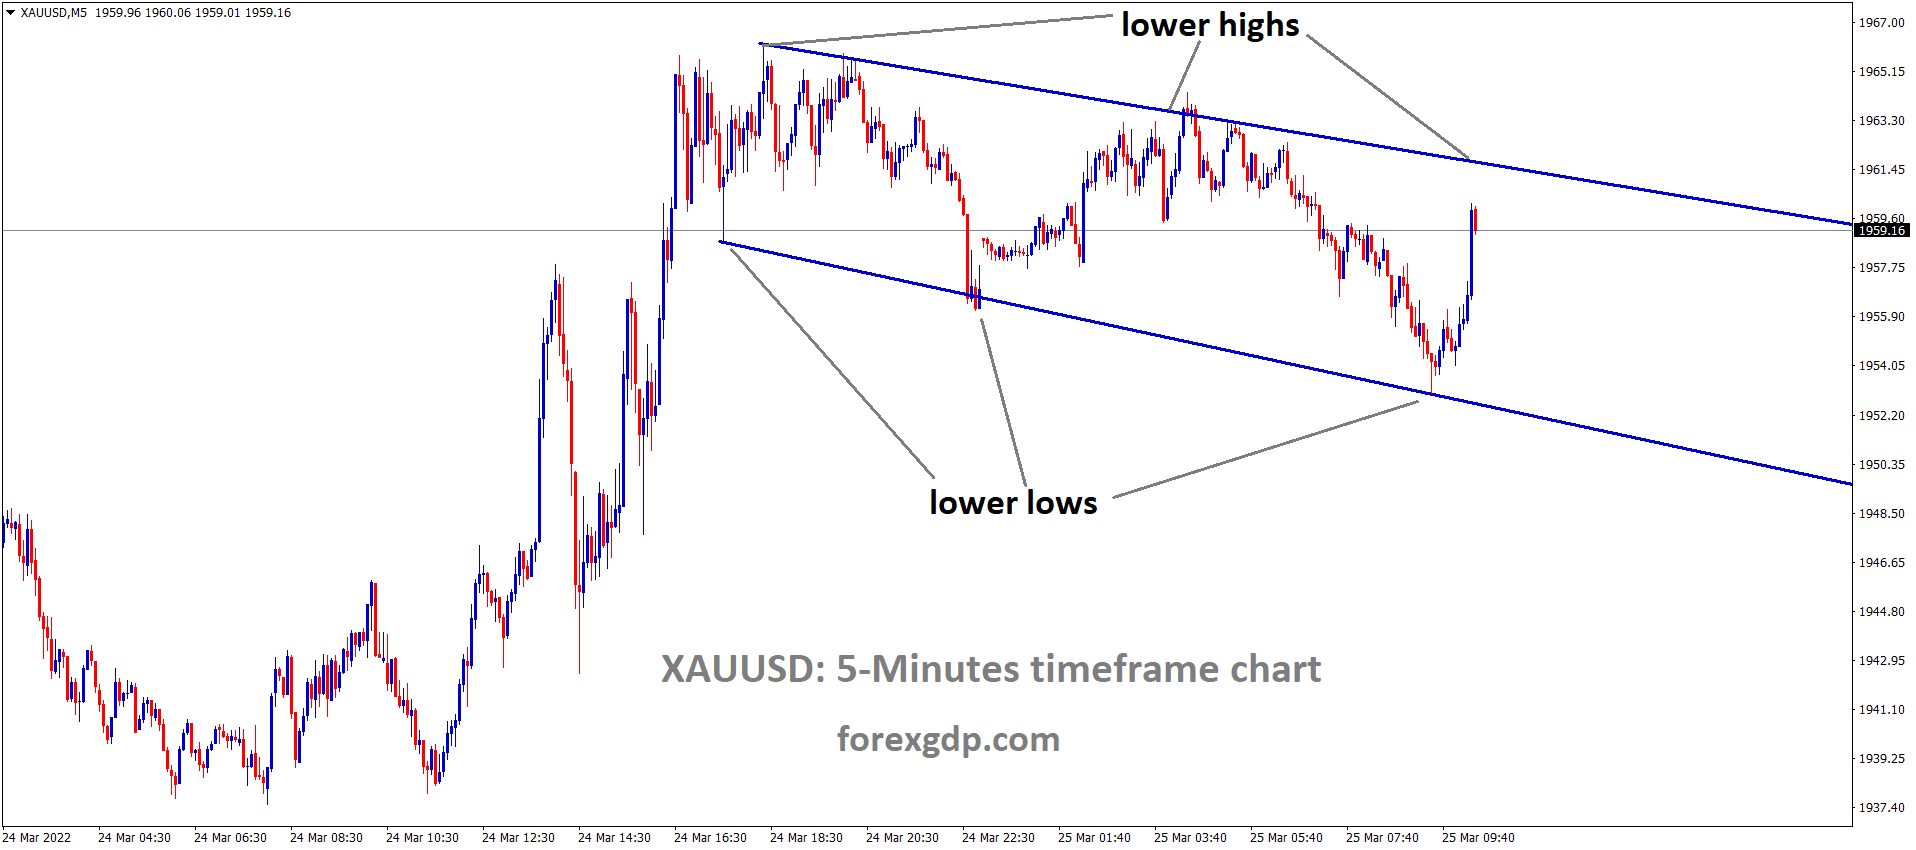 XAUUSD M5 Market is moving in the Descending channel and the market has reached the lower high area of the Descending channel.